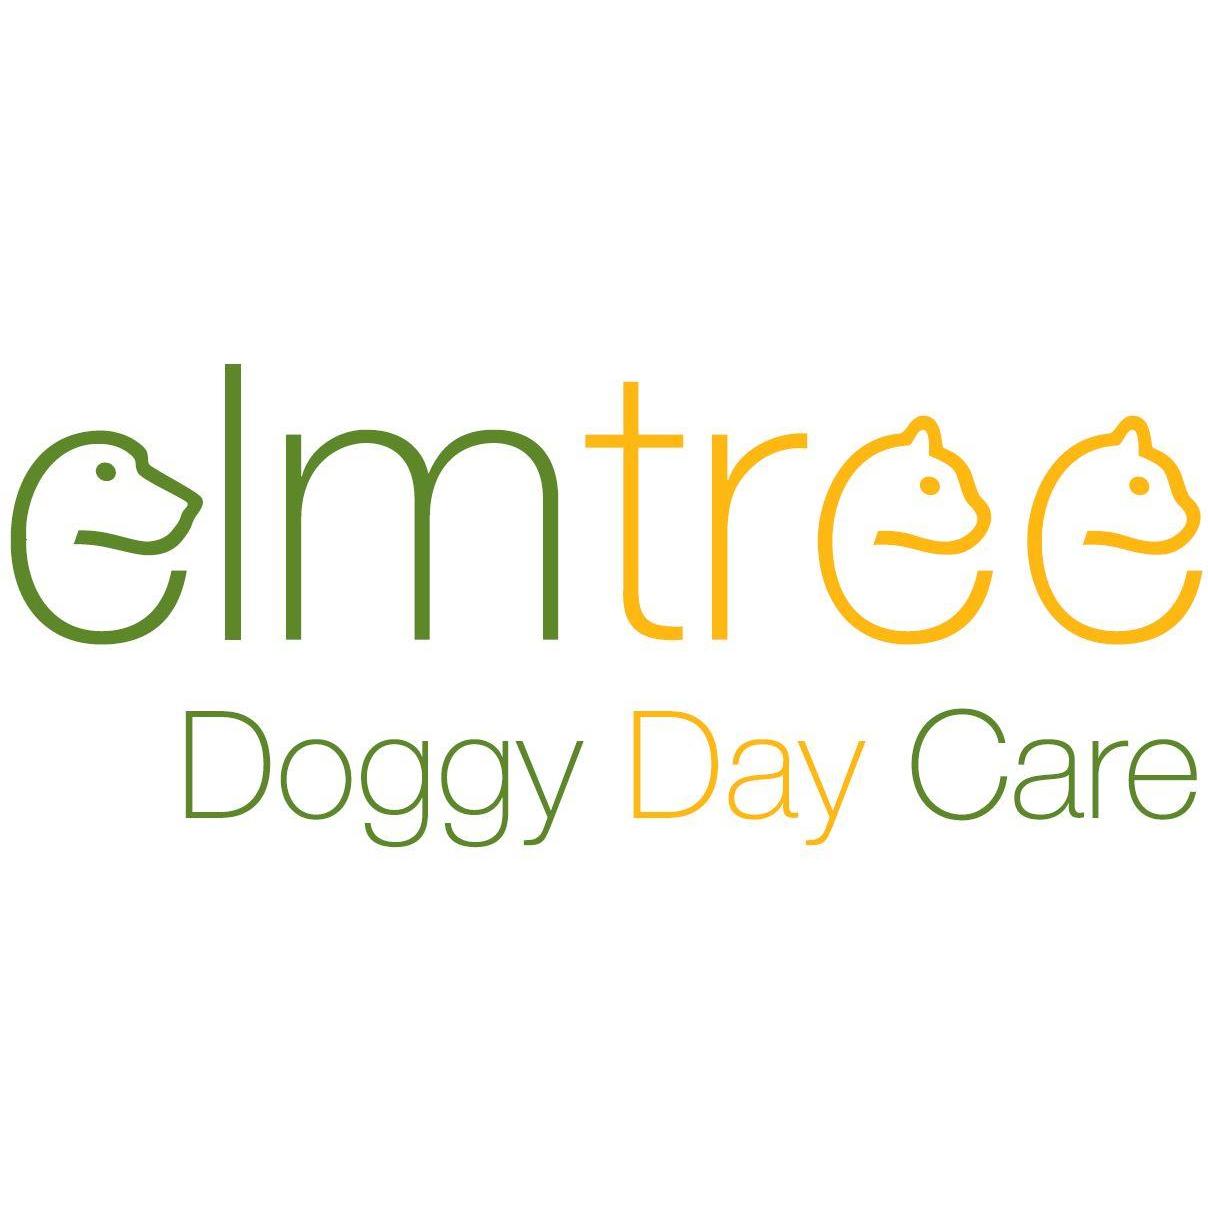 Elmtree Doggy Day Care Centre - Enfield, London EN2 9DY - 020 8367 4625 | ShowMeLocal.com